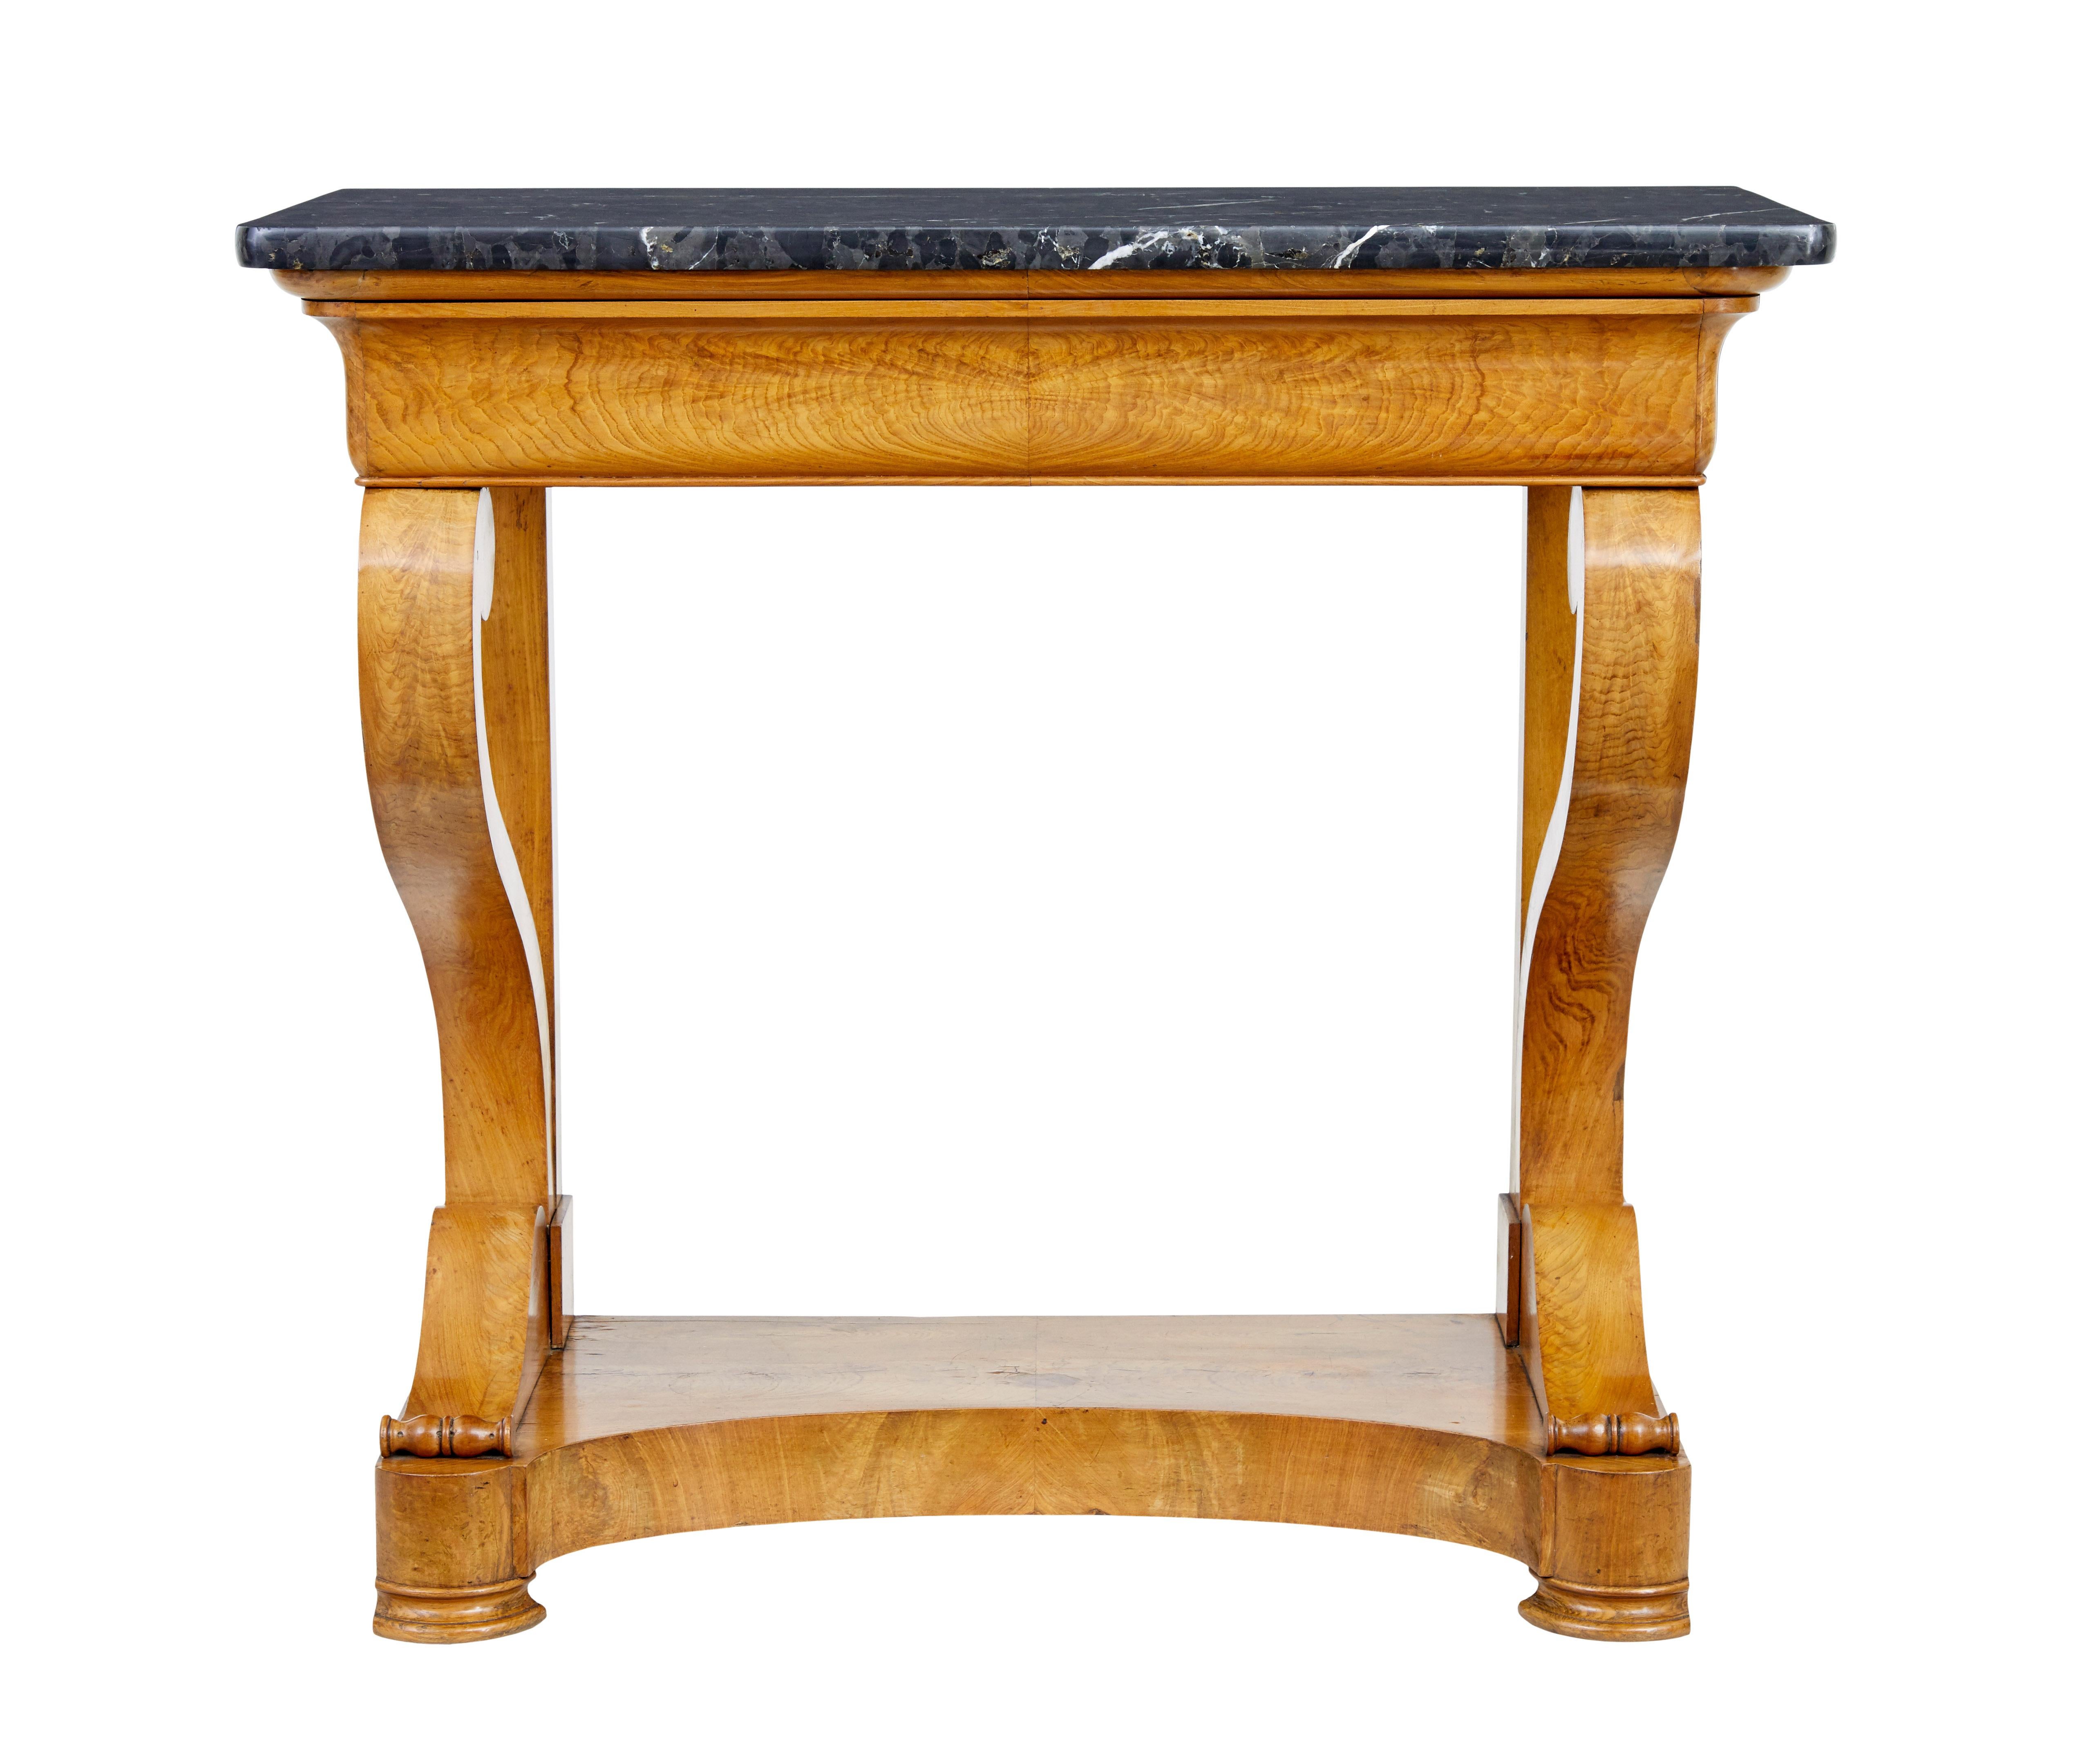 Mid 19th century Swedish elm marble top console table circa 1860.

Fine quality console table of grand proportions.  Shaped marble top standing on an elm base.  Single concealed drawer below the top surface. Scrolled front legs with serpentine